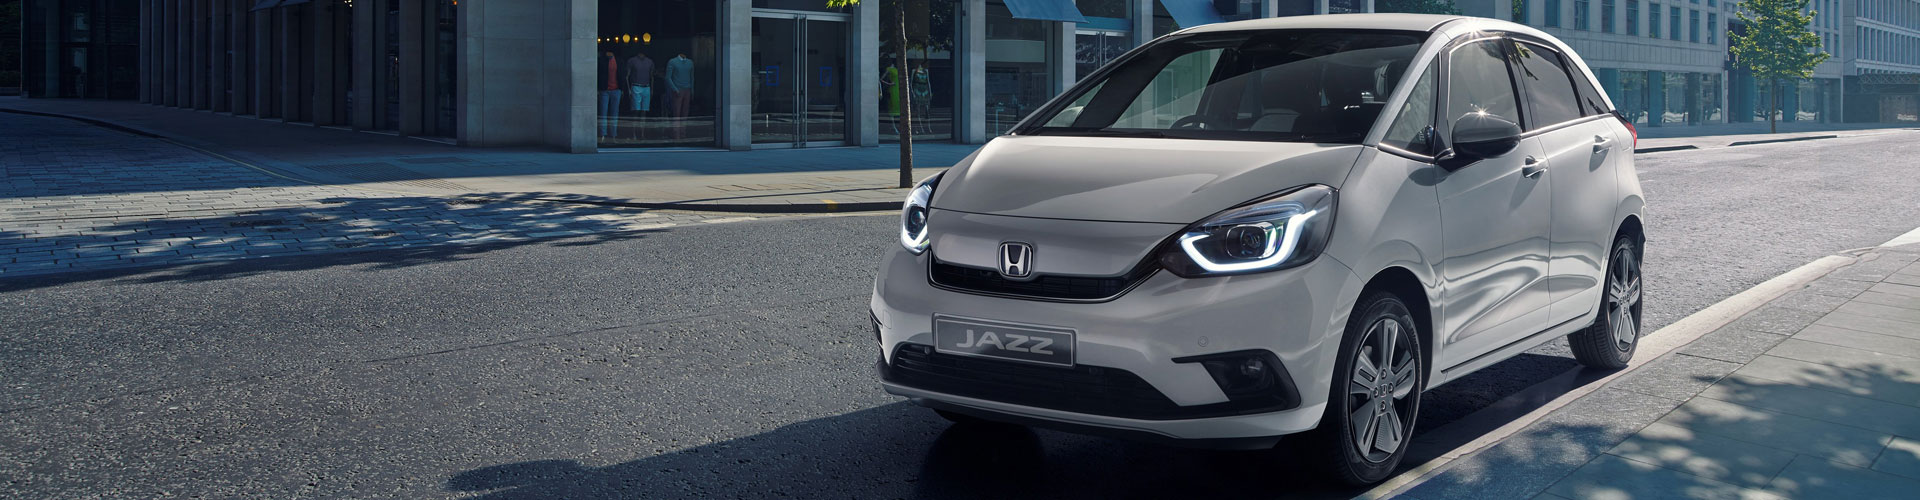 All new Jazz leads electrification charge for Honda